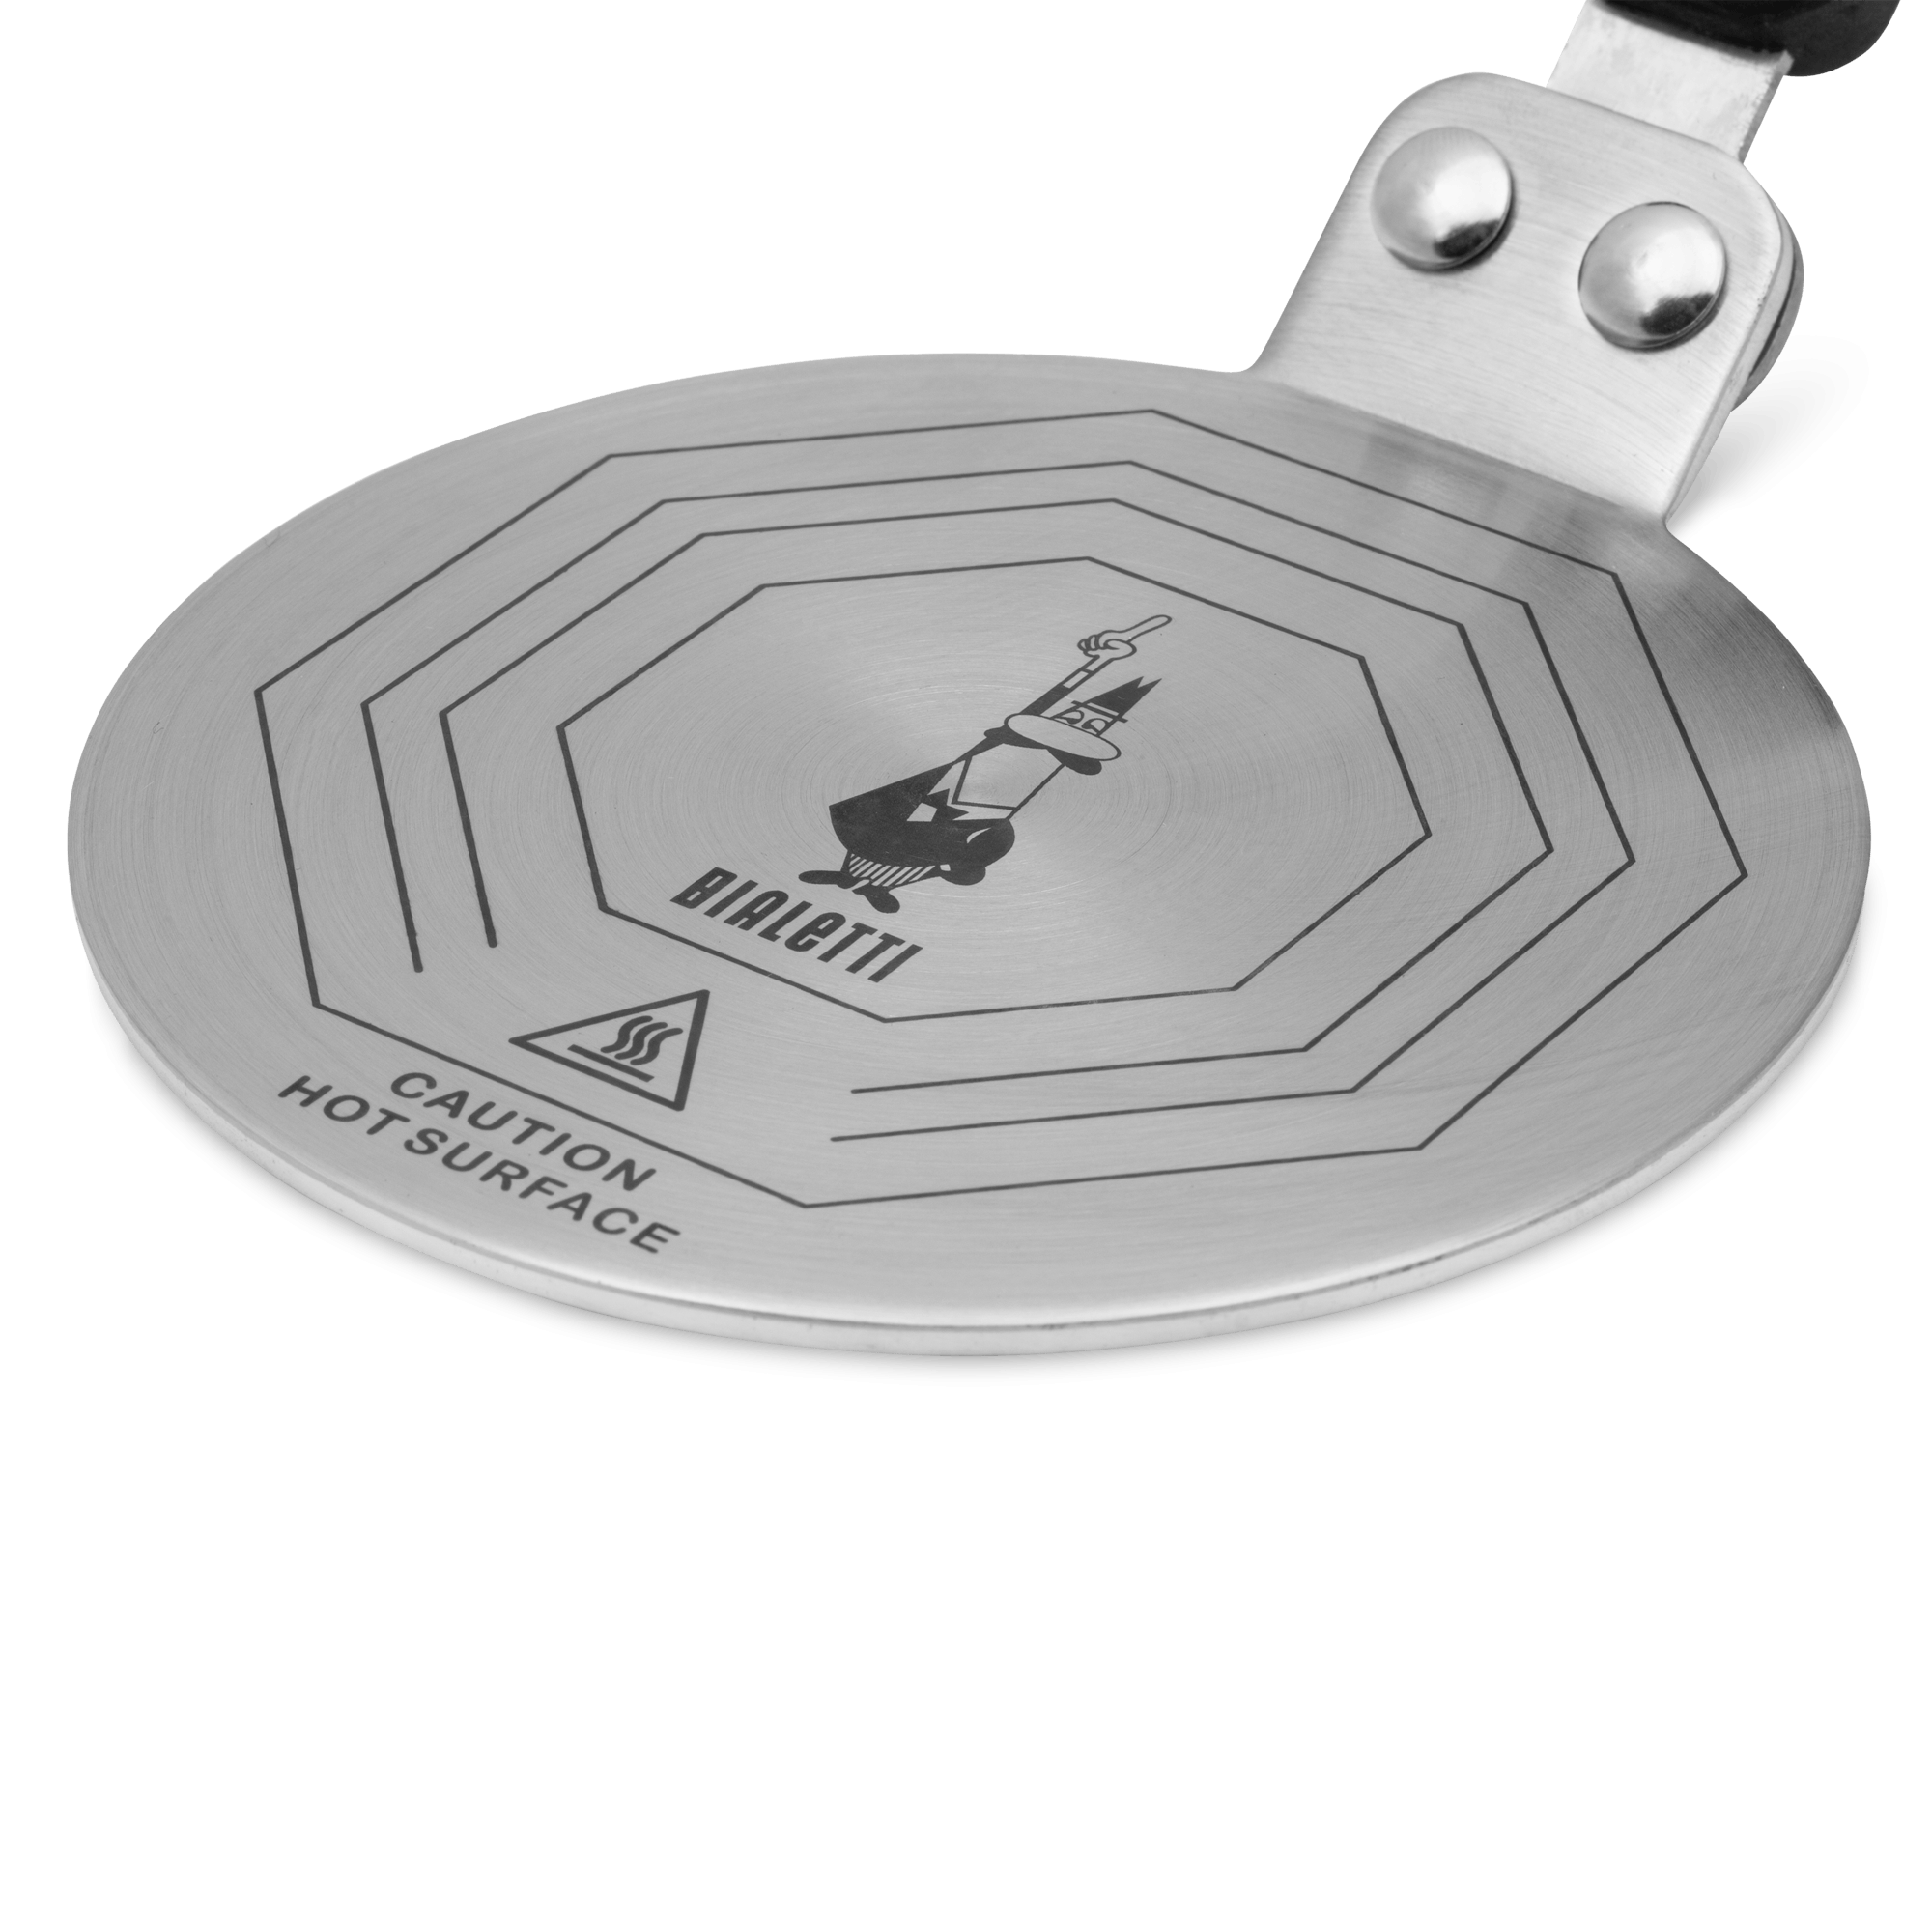 Bialetti Induction Adapter Plate 13cm – Java Gourmet Coffee